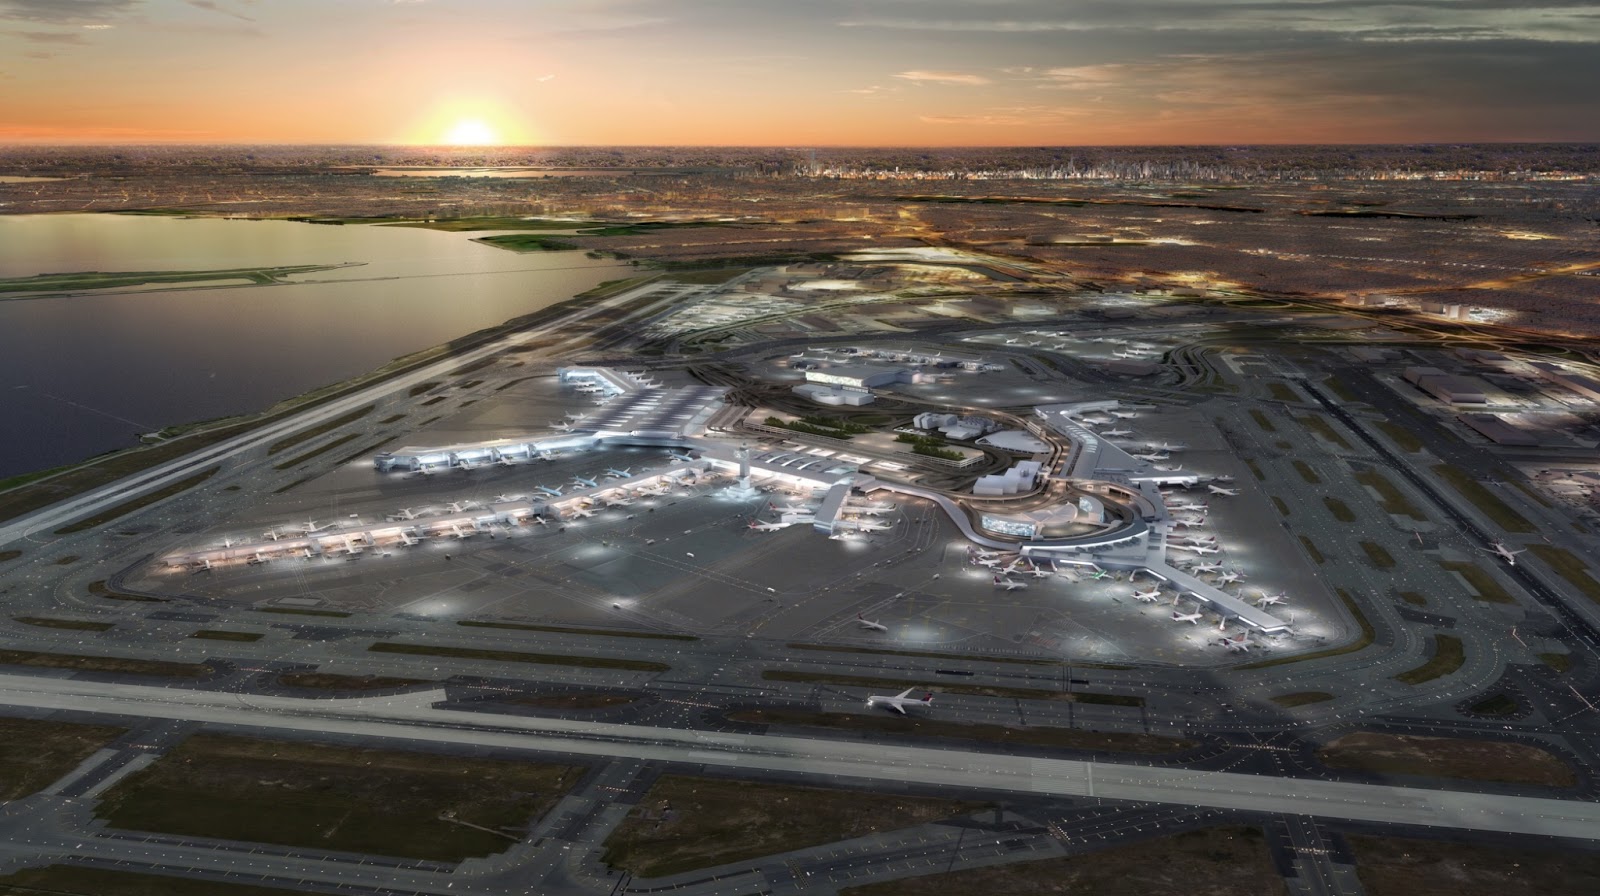 About Airport Planning Jfk Transformation 2 New Terminals T1 And T6